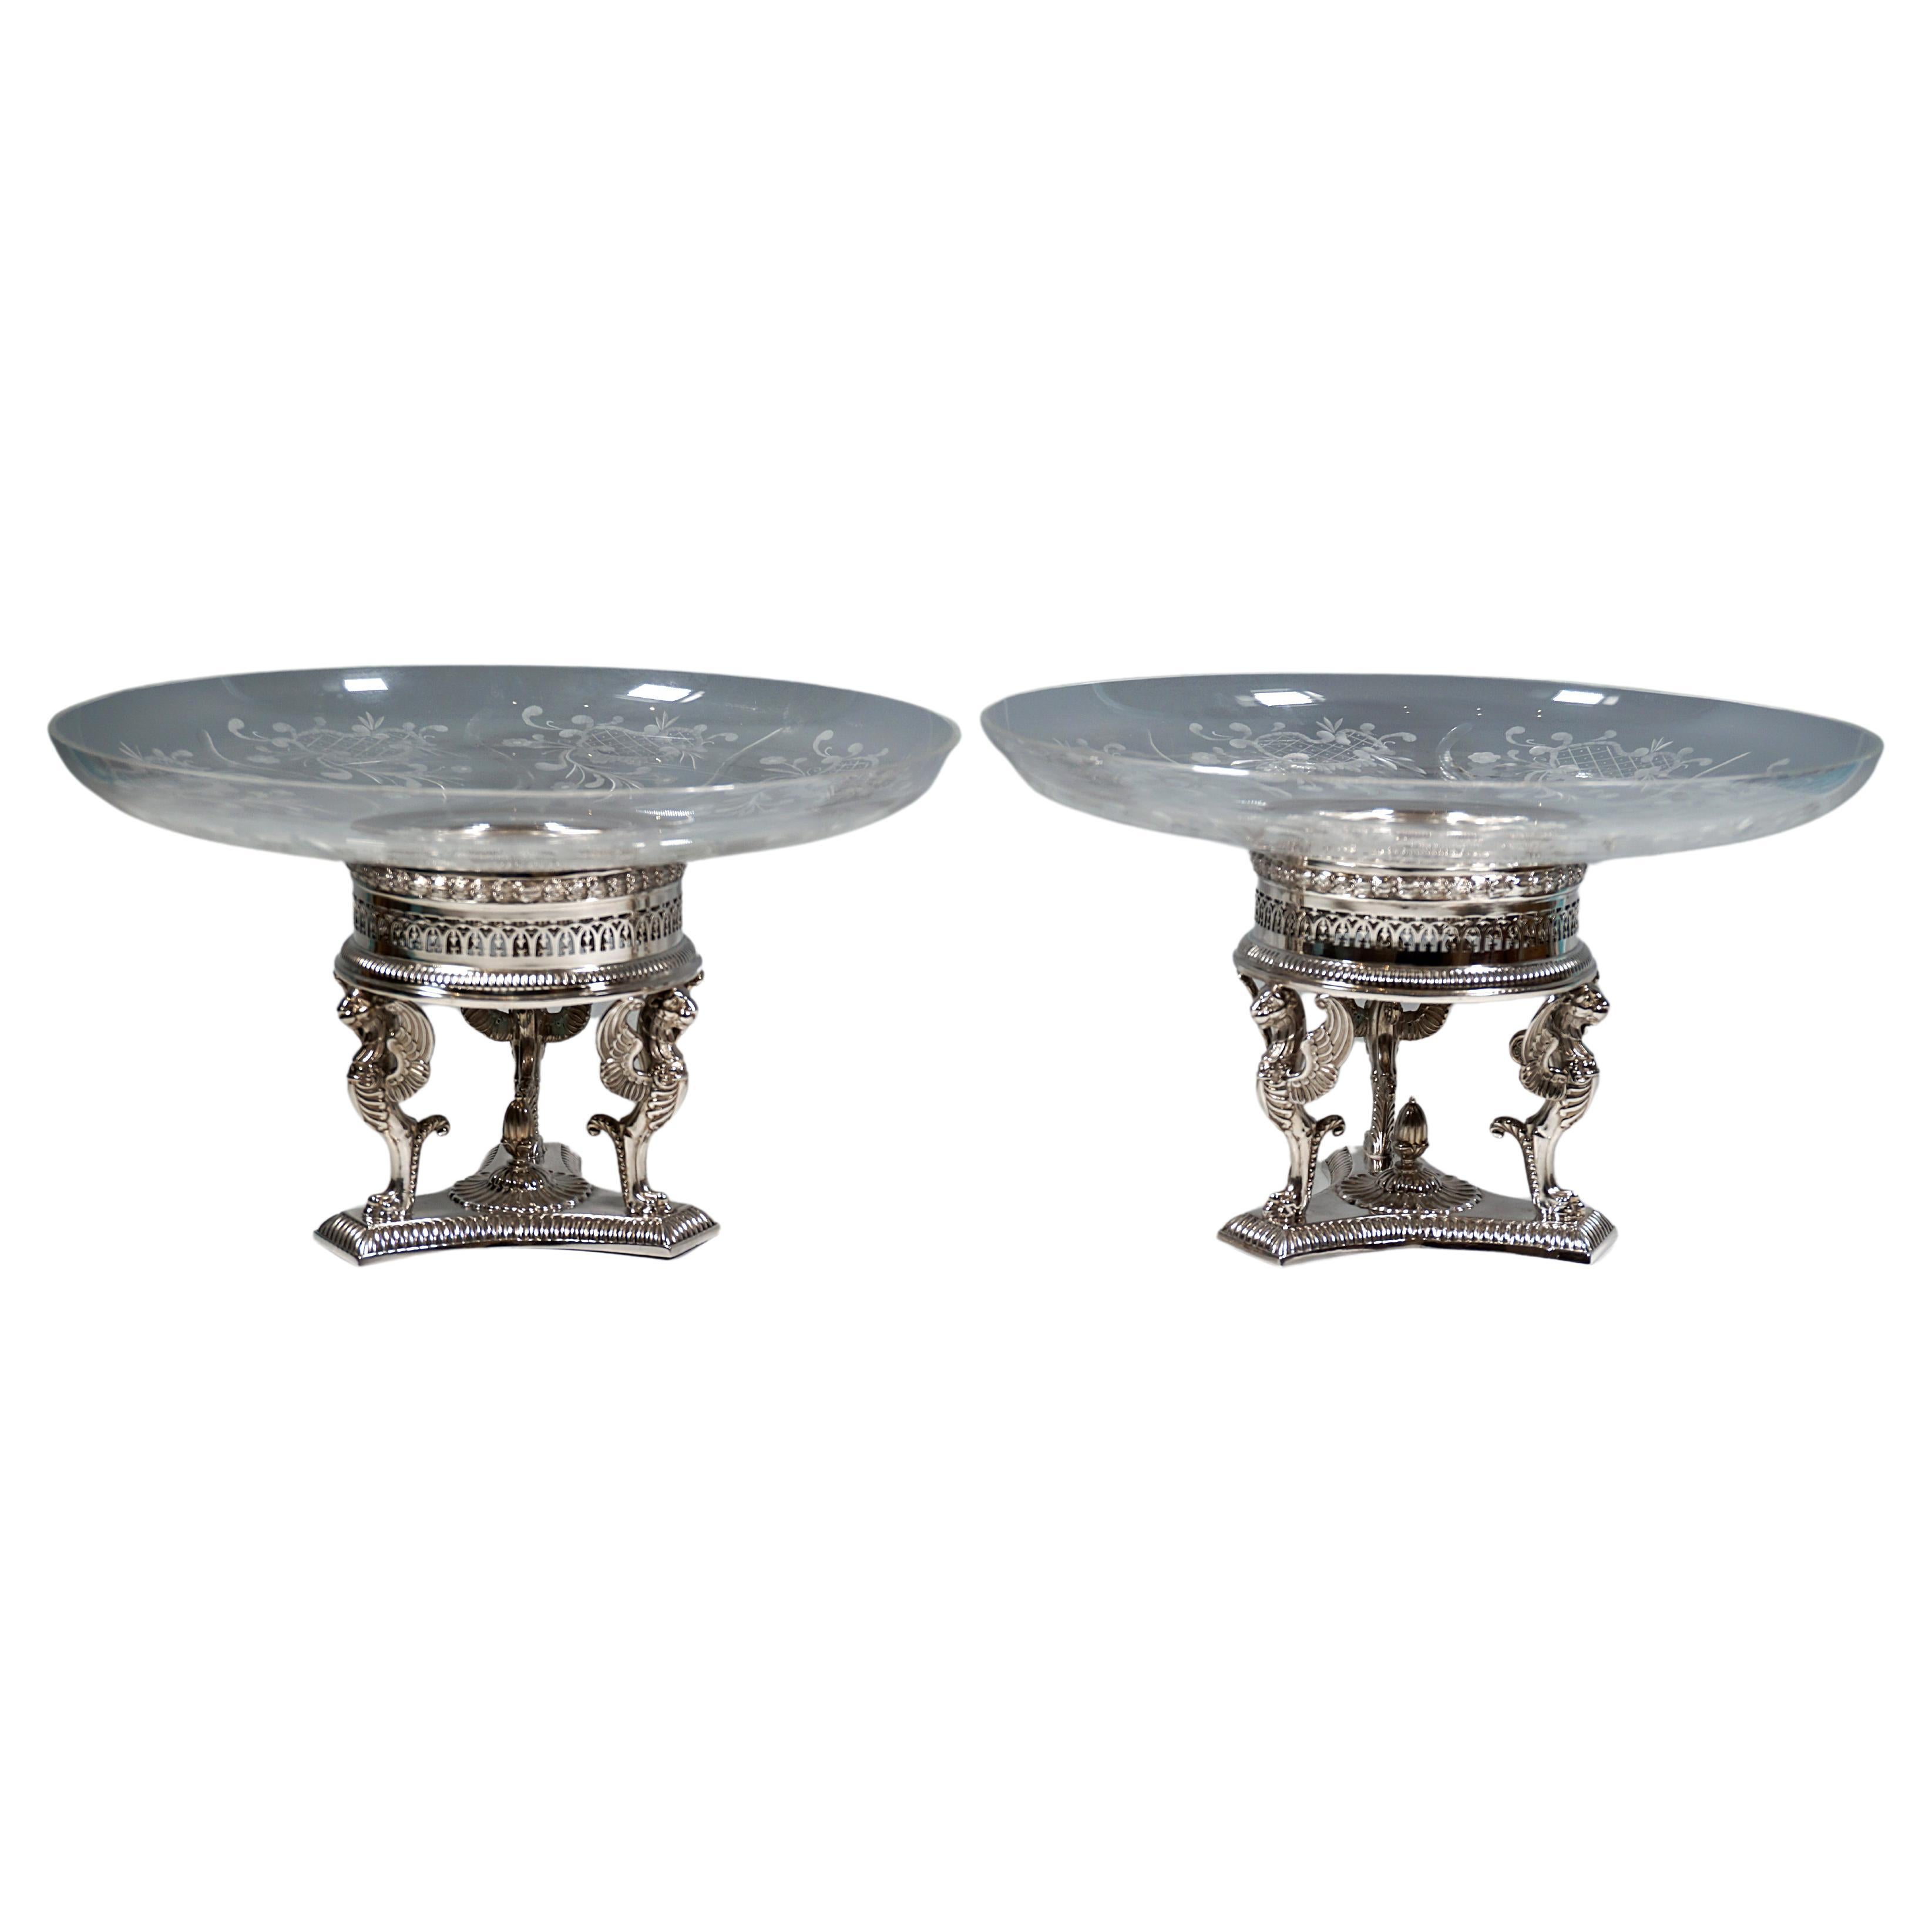 Pair Of Silver Centerpieces With Glass Bowls, Bruckmann & Sons for Knewitz c1920 For Sale